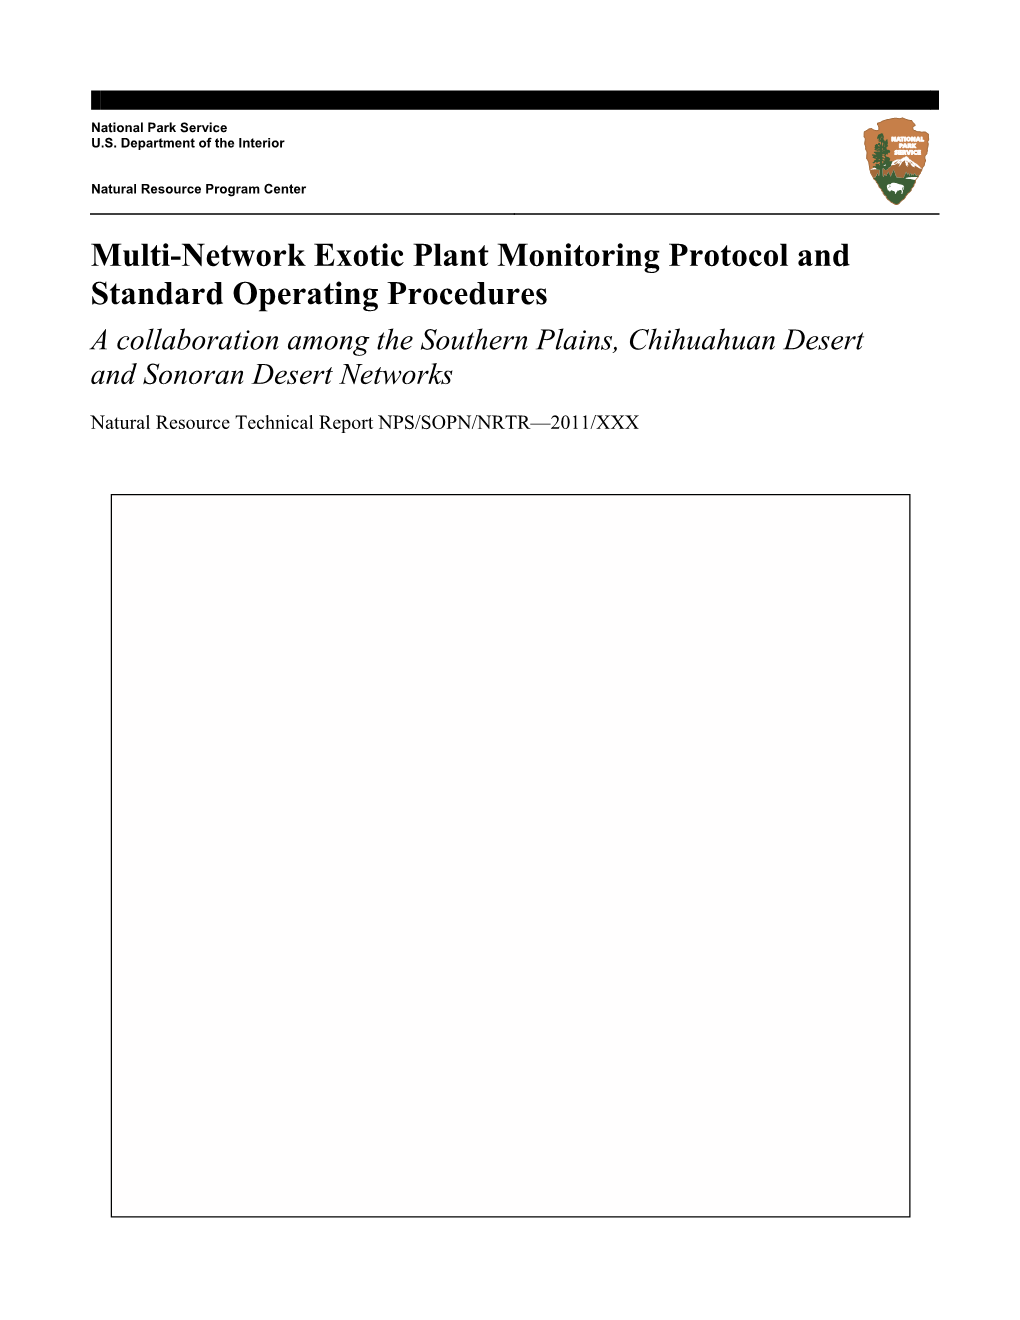 Multi-Network Exotic Plant Monitoring Protocol and Standard